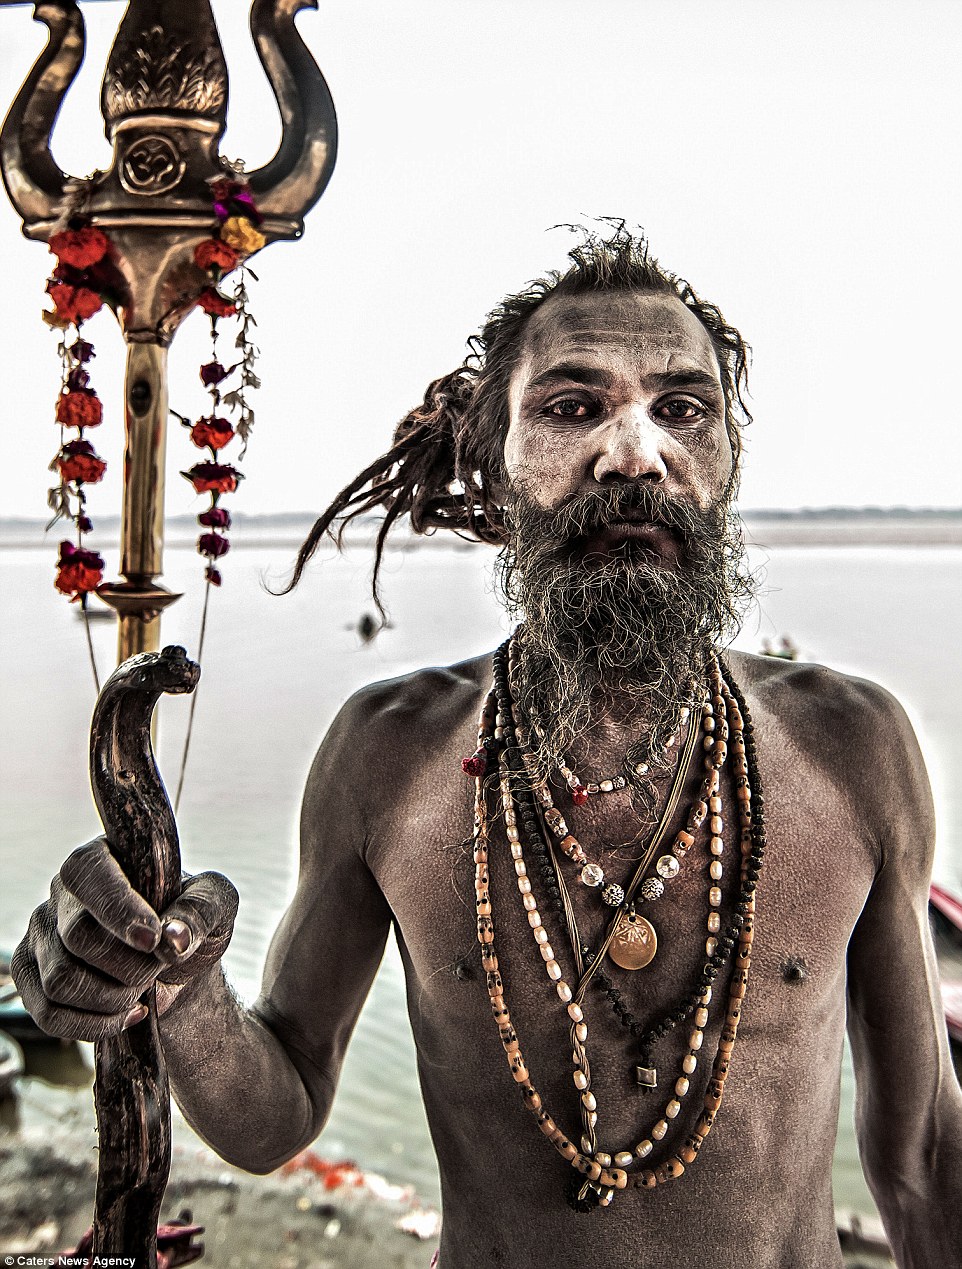 The Monks Feast On Human Flesh, Drink From Human Skulls - Aghori Tribe , HD Wallpaper & Backgrounds